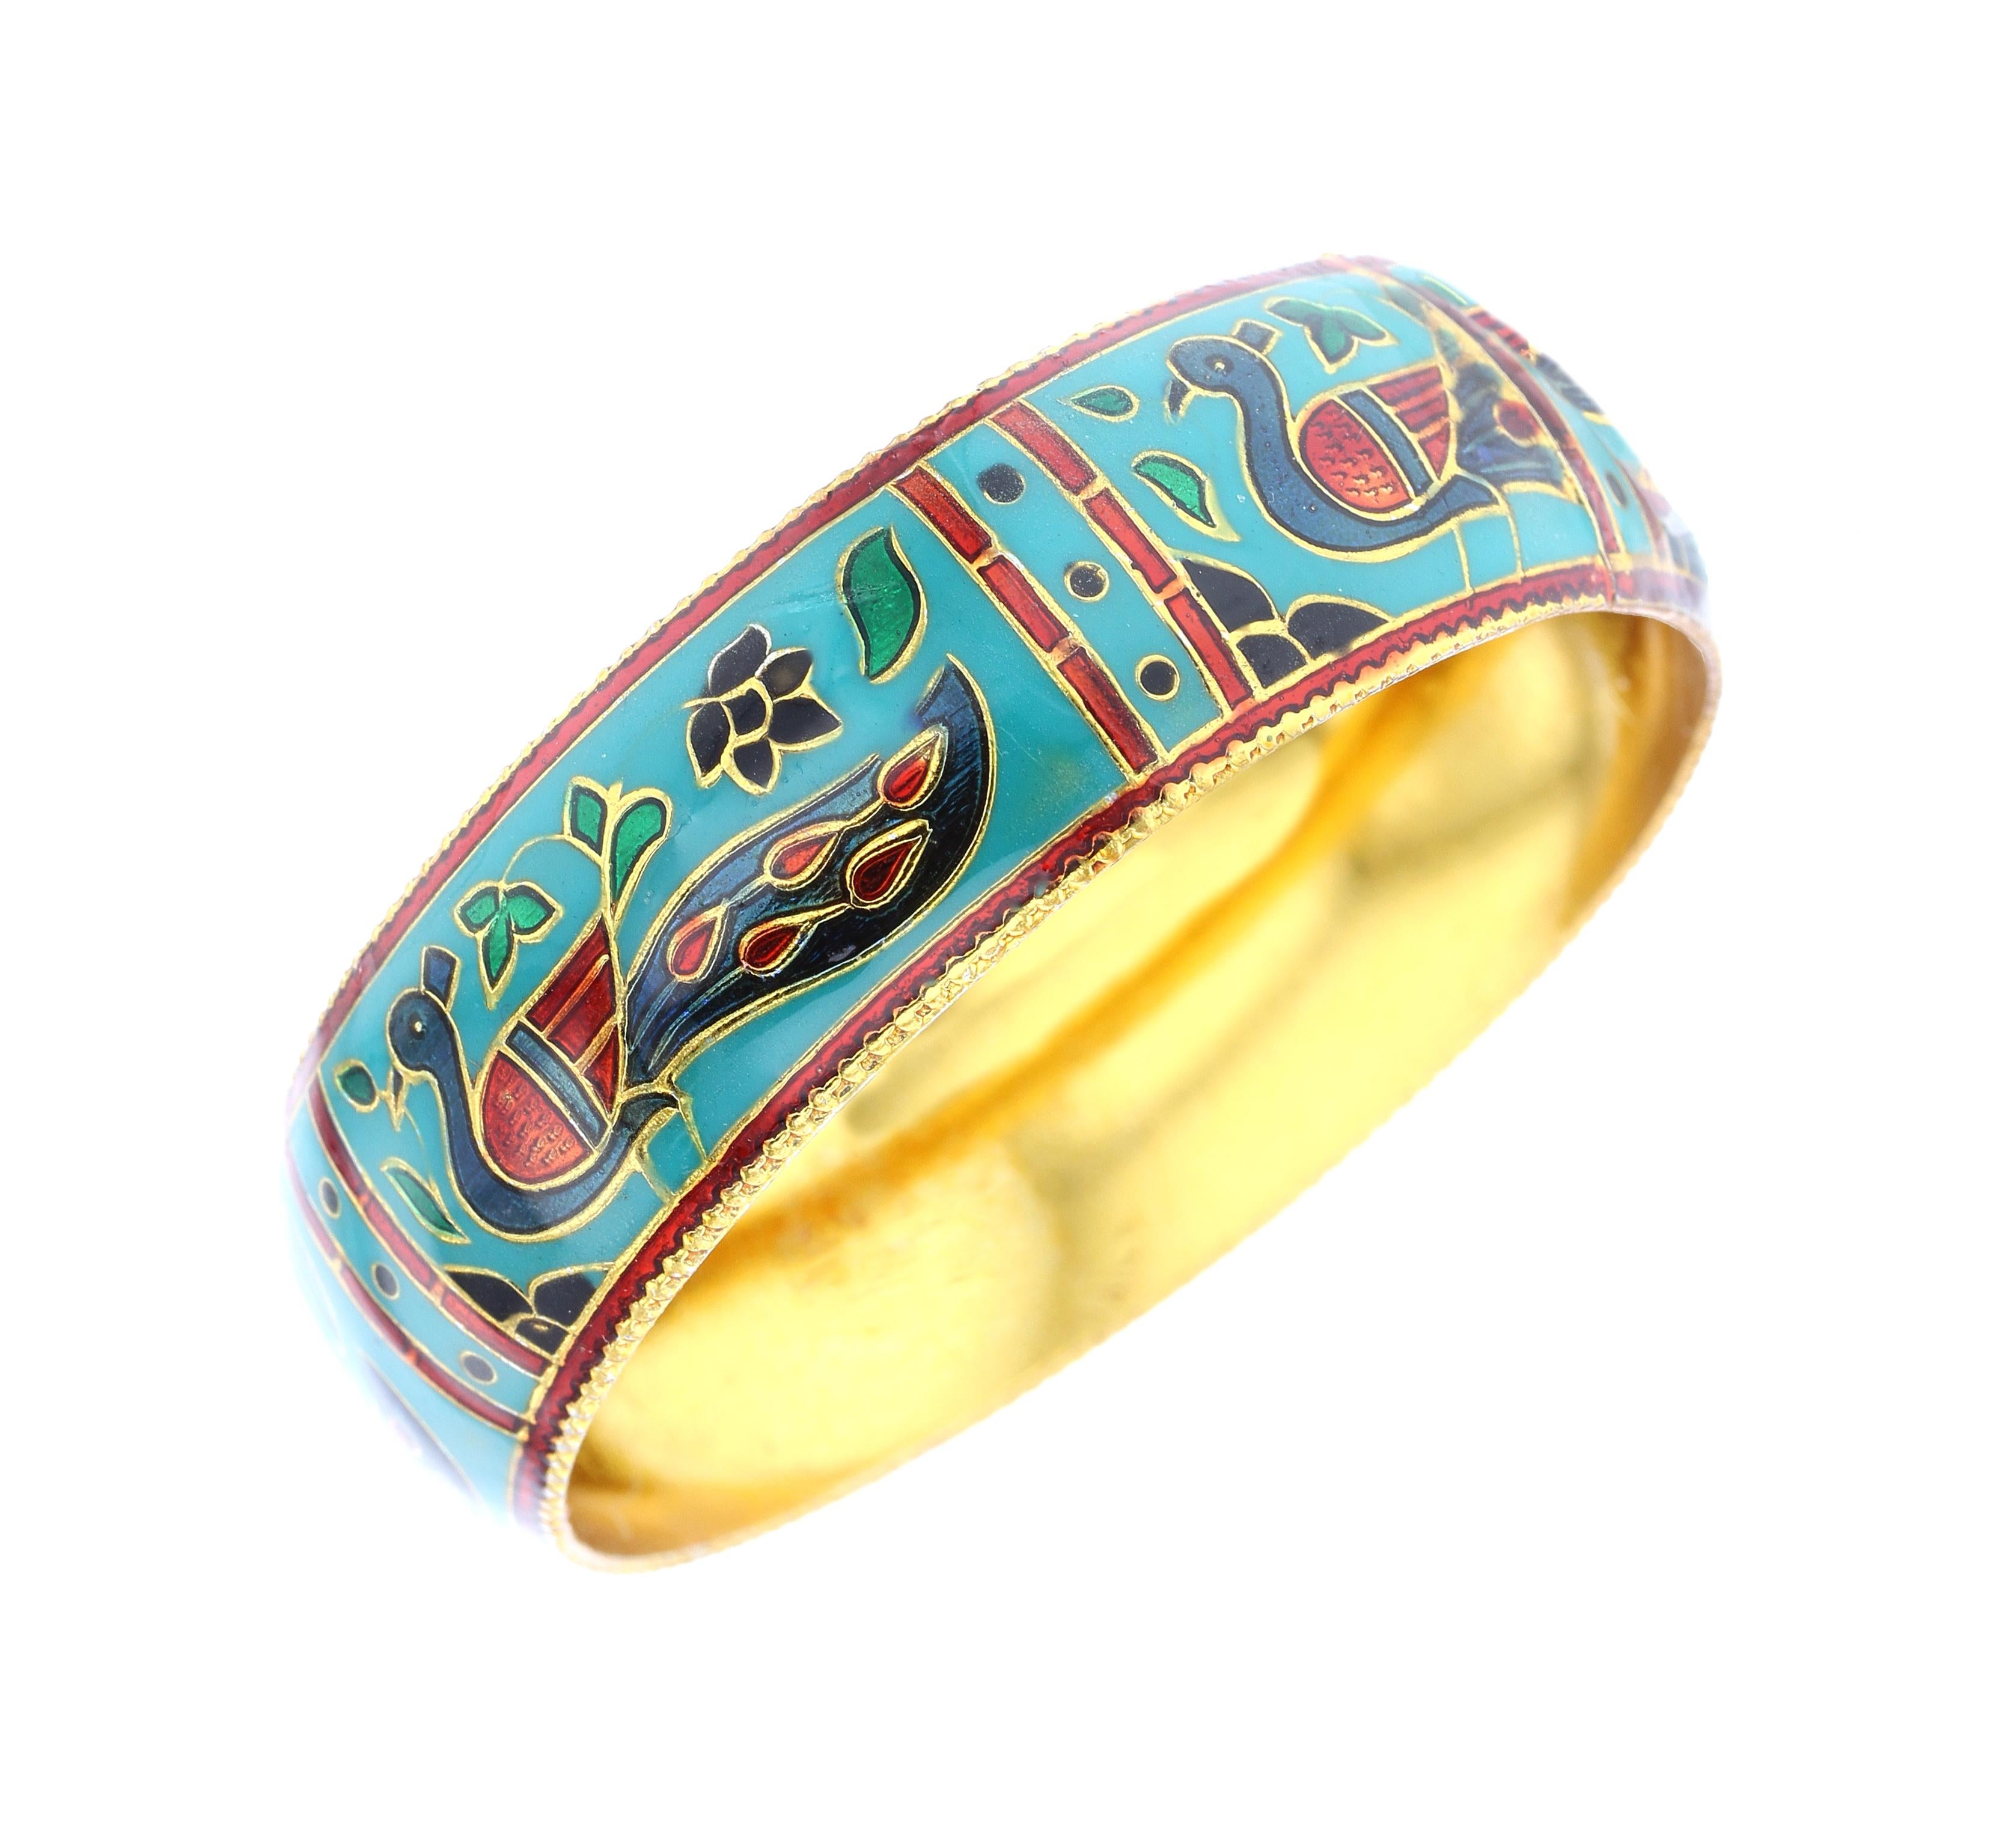 A beautiful and elegant bangle/bracelet with an peacock and floral design in enamel. Inner Diameter: 2.50